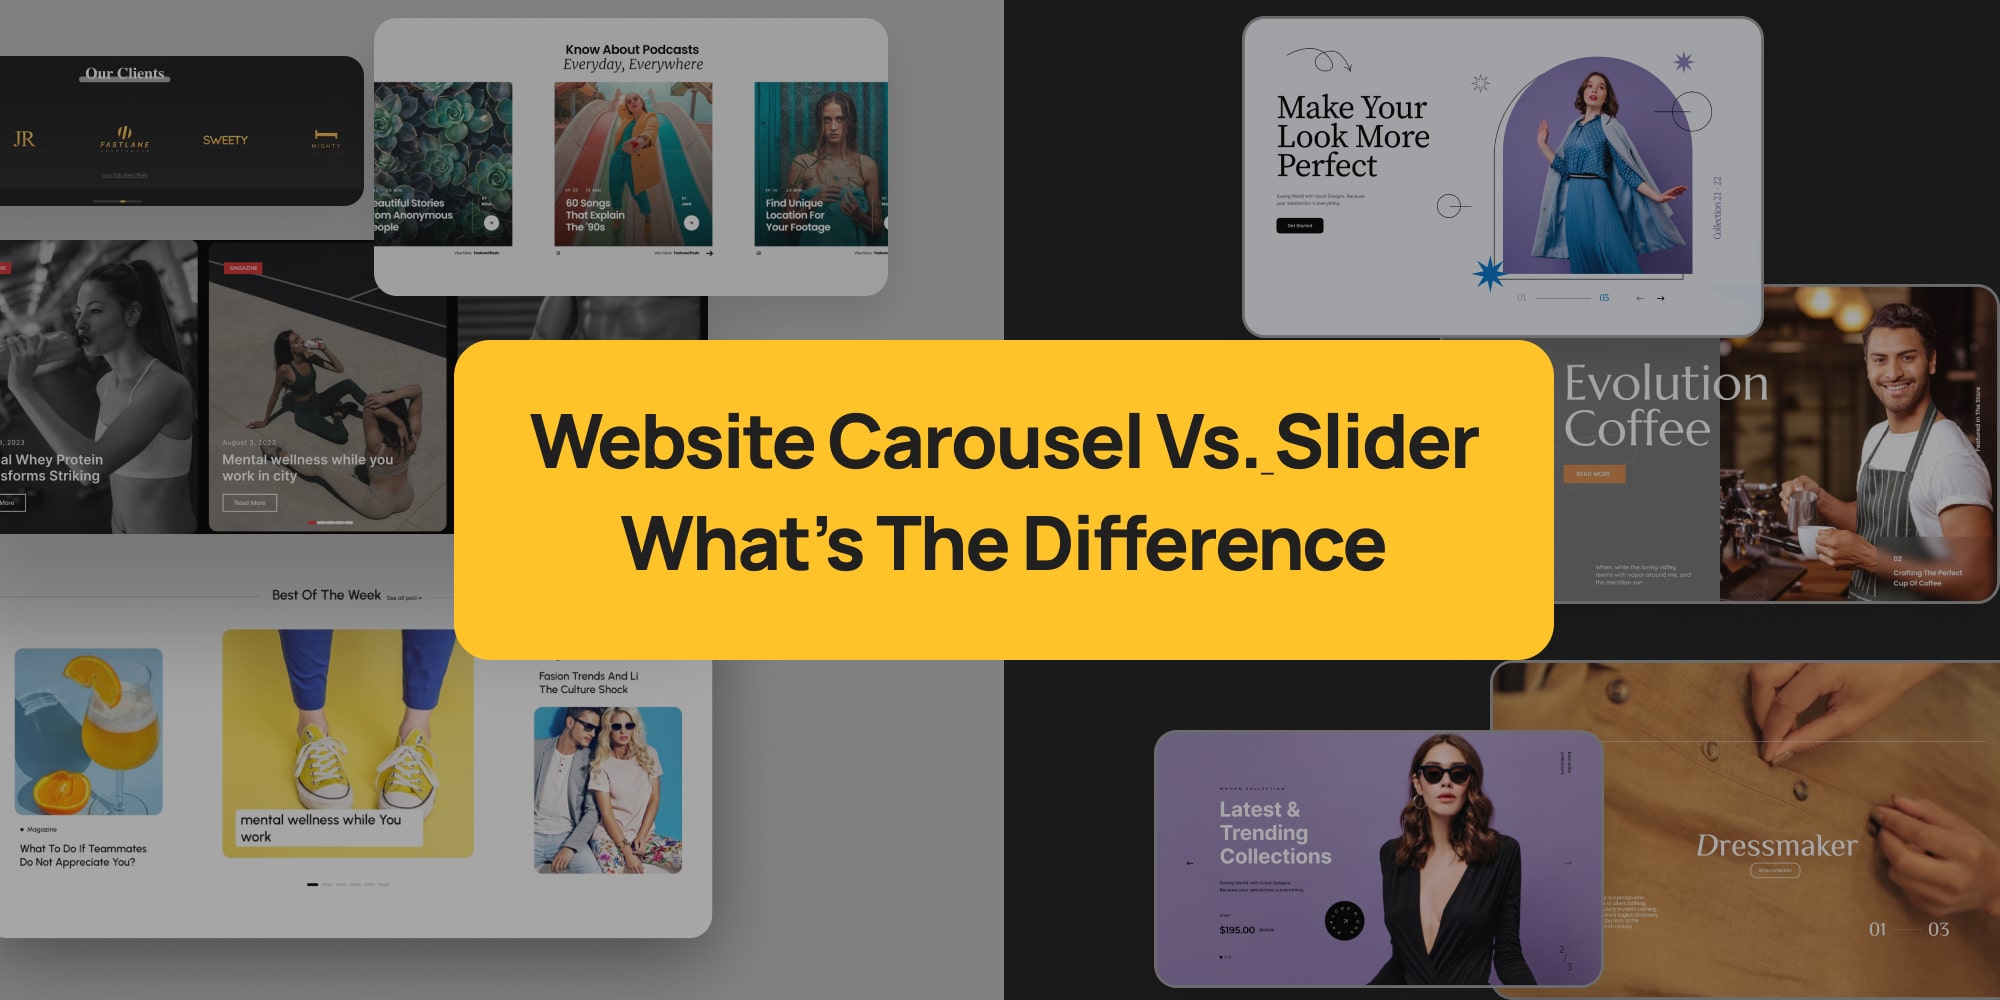 Website Carousel vs. Slider: What's the Difference